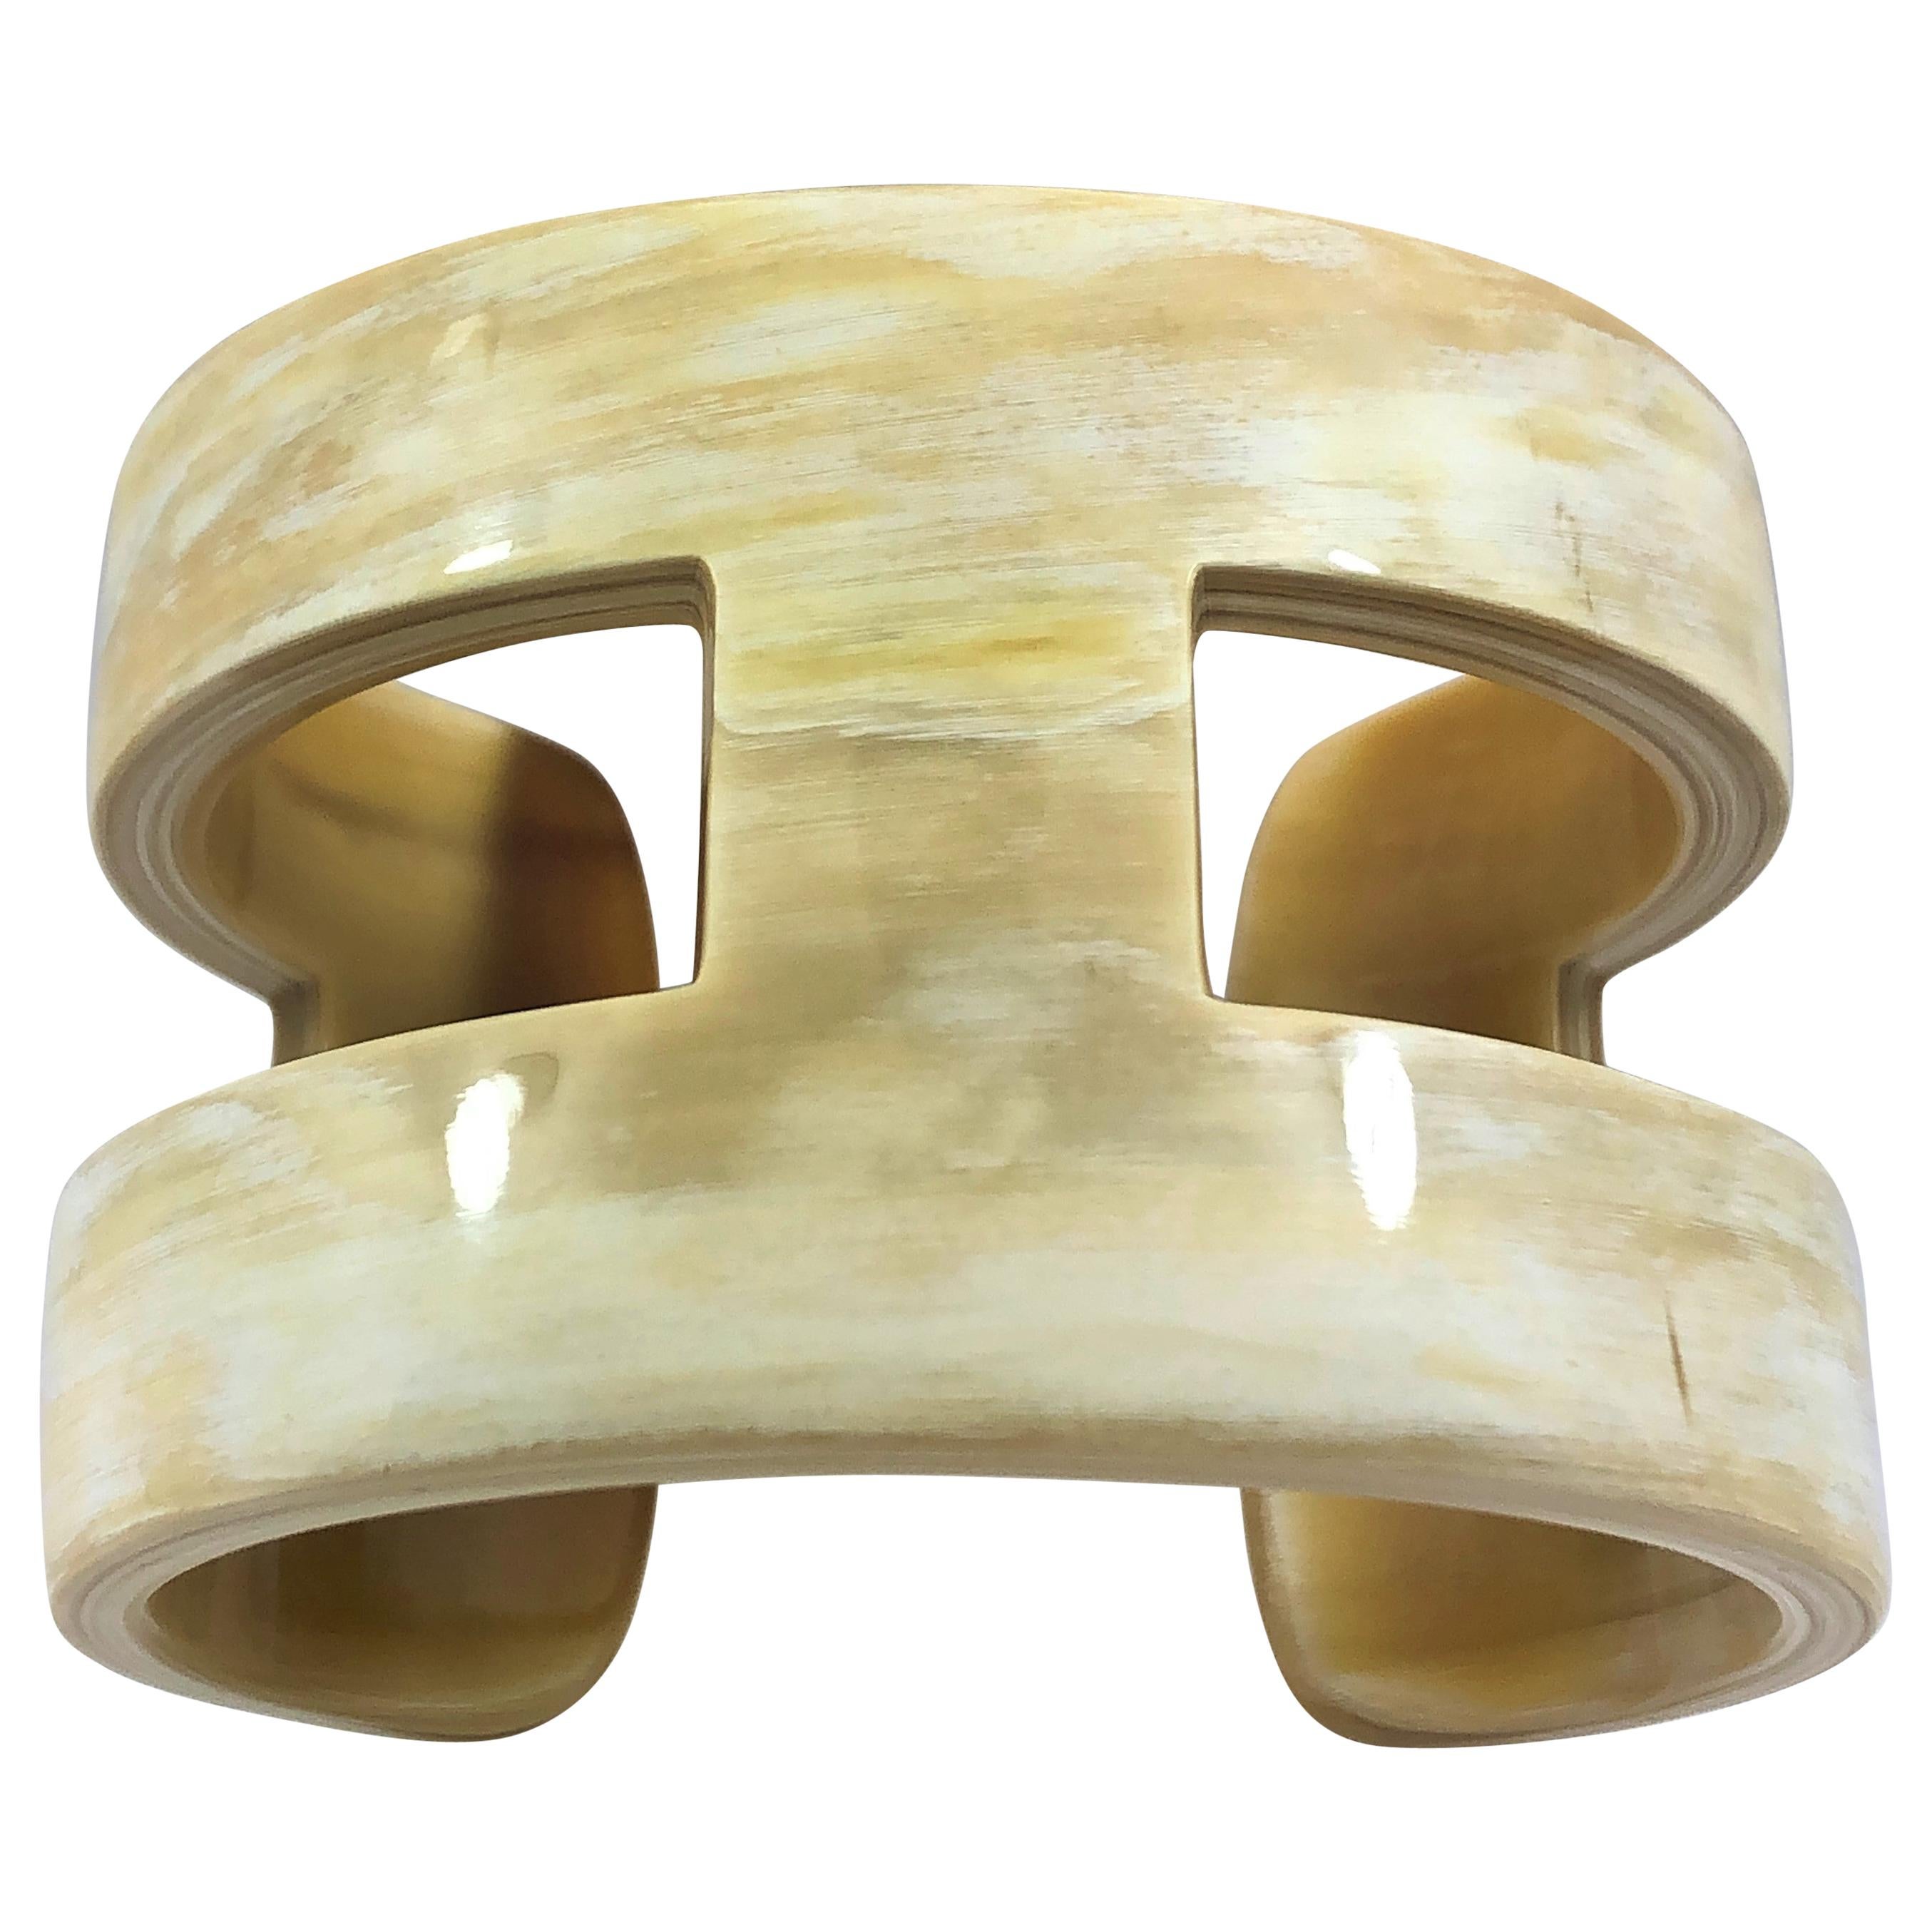 Creamy White "H" Style Horn Cuff or Bangle with Natural Characteristic Graining